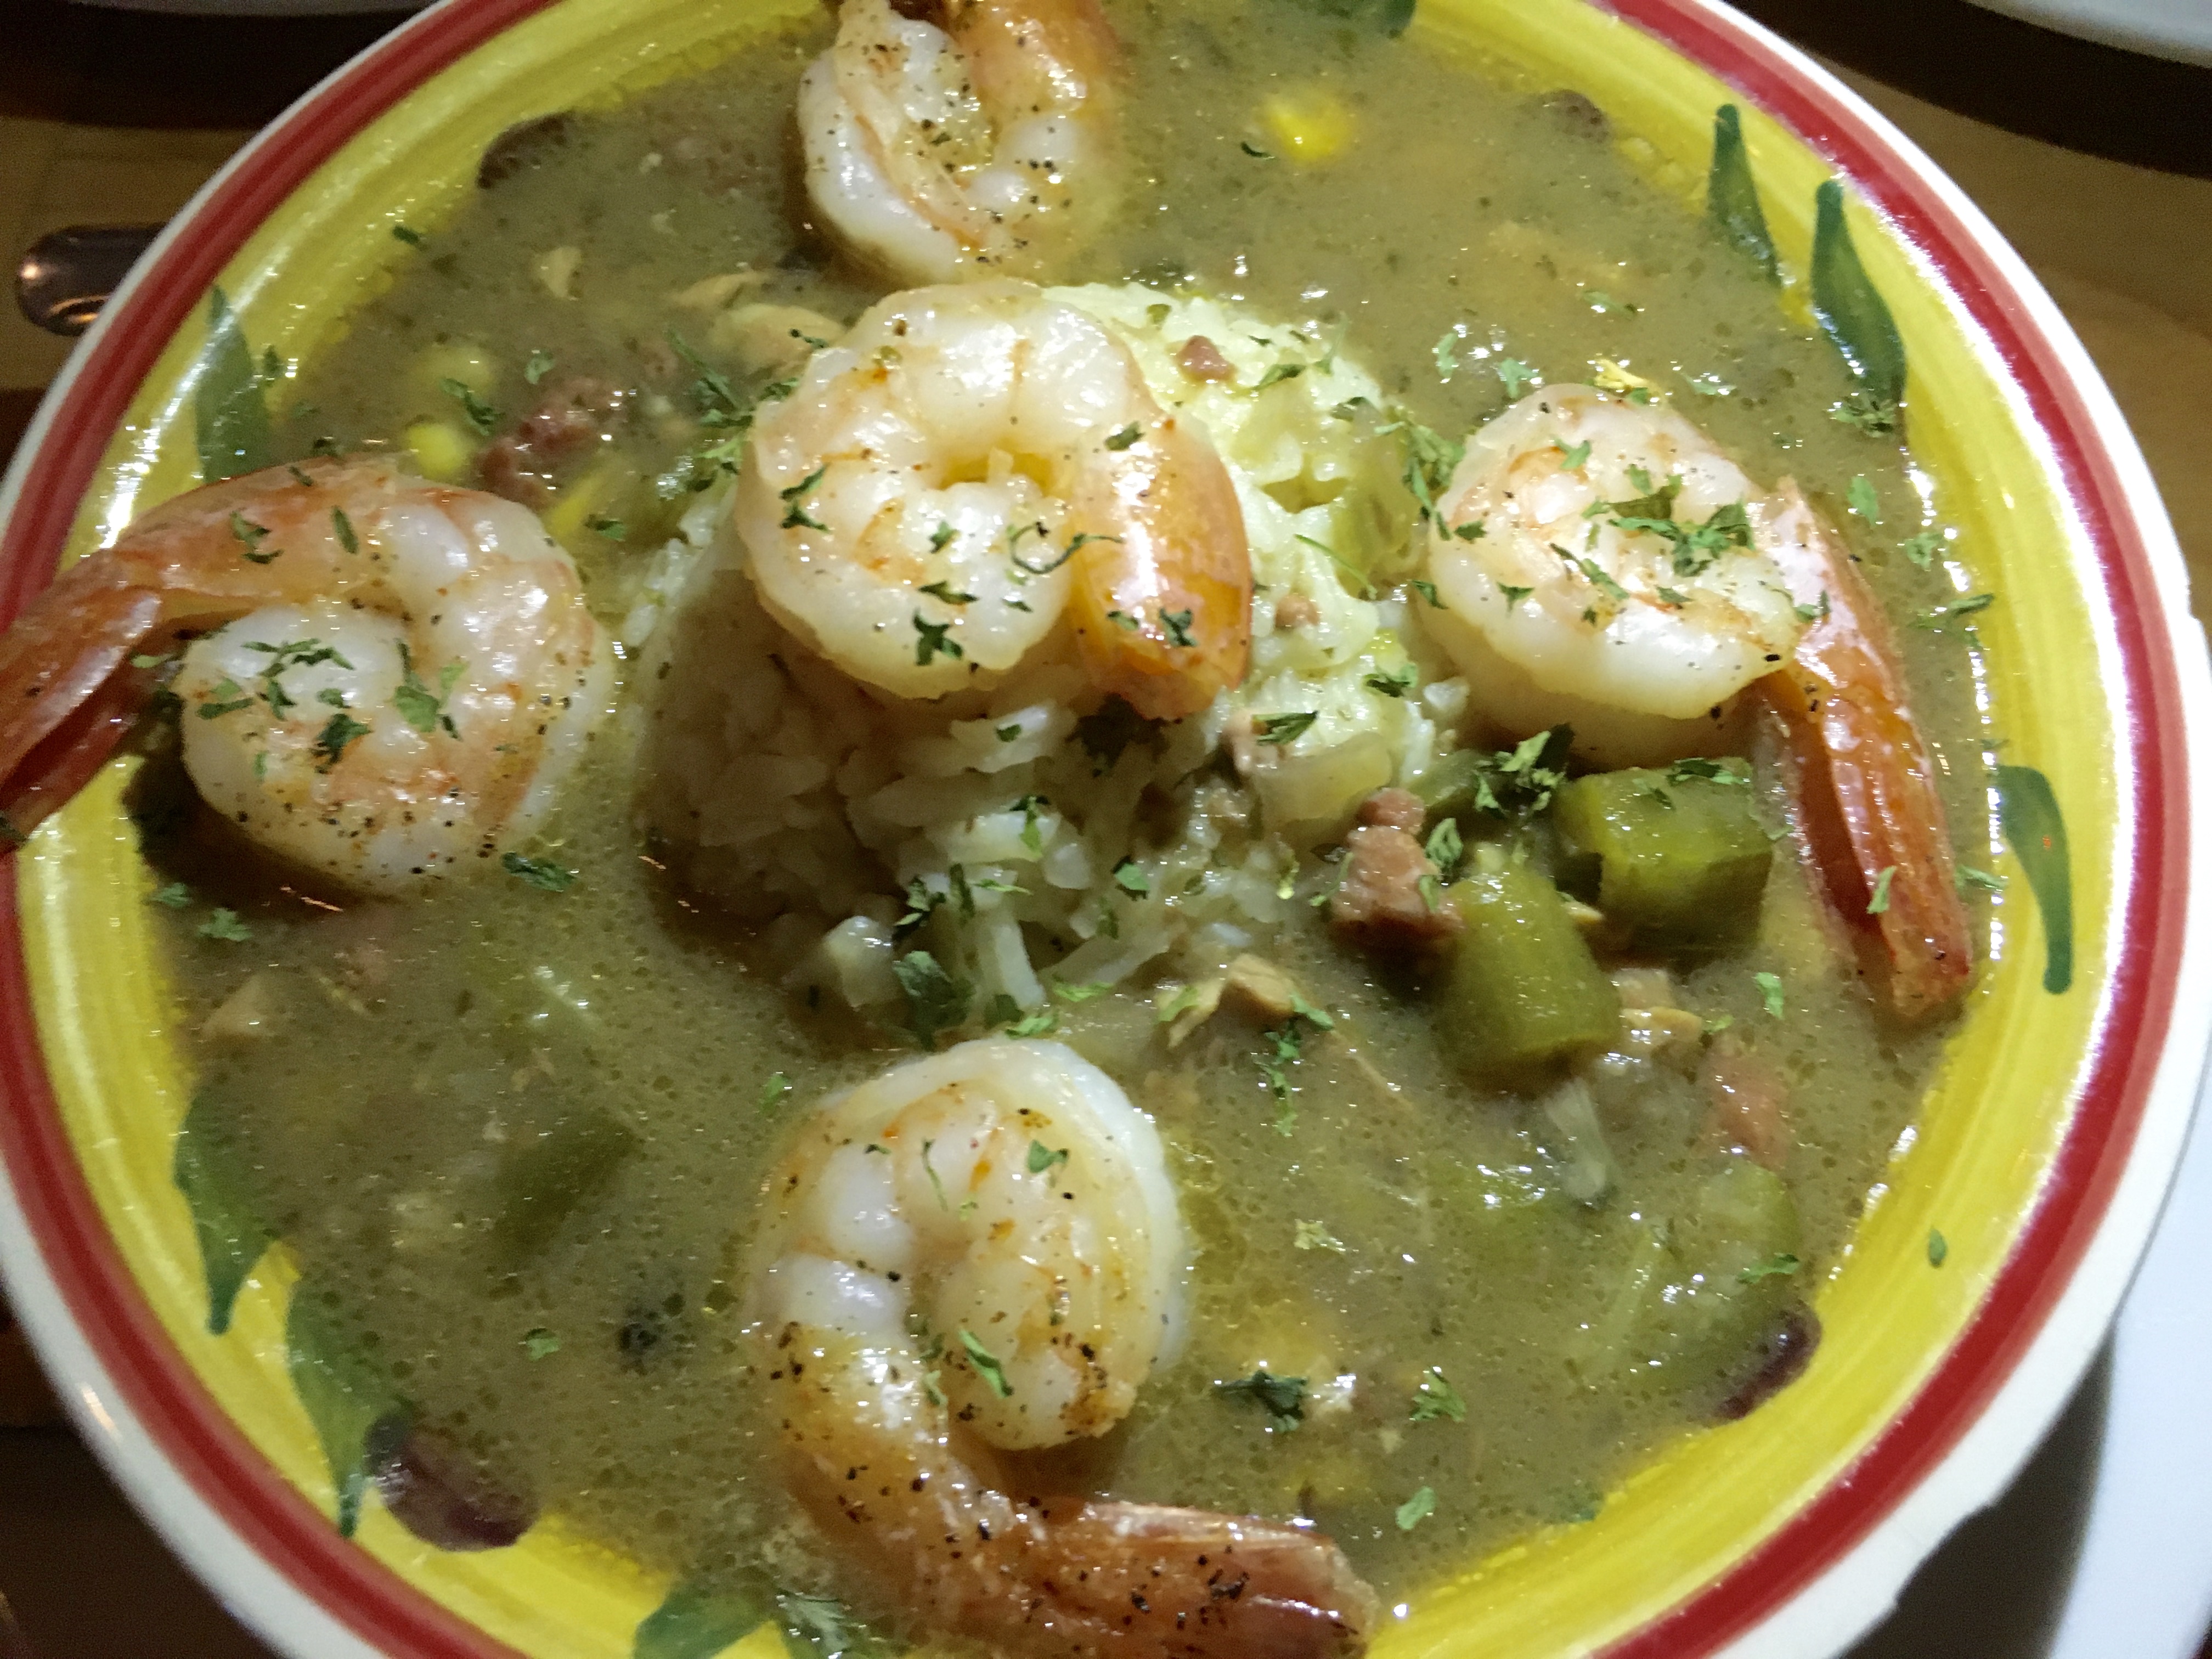 Chicken & Andouille Sausage Gumbo with added Shrimp at Old Key West Bar & Grill